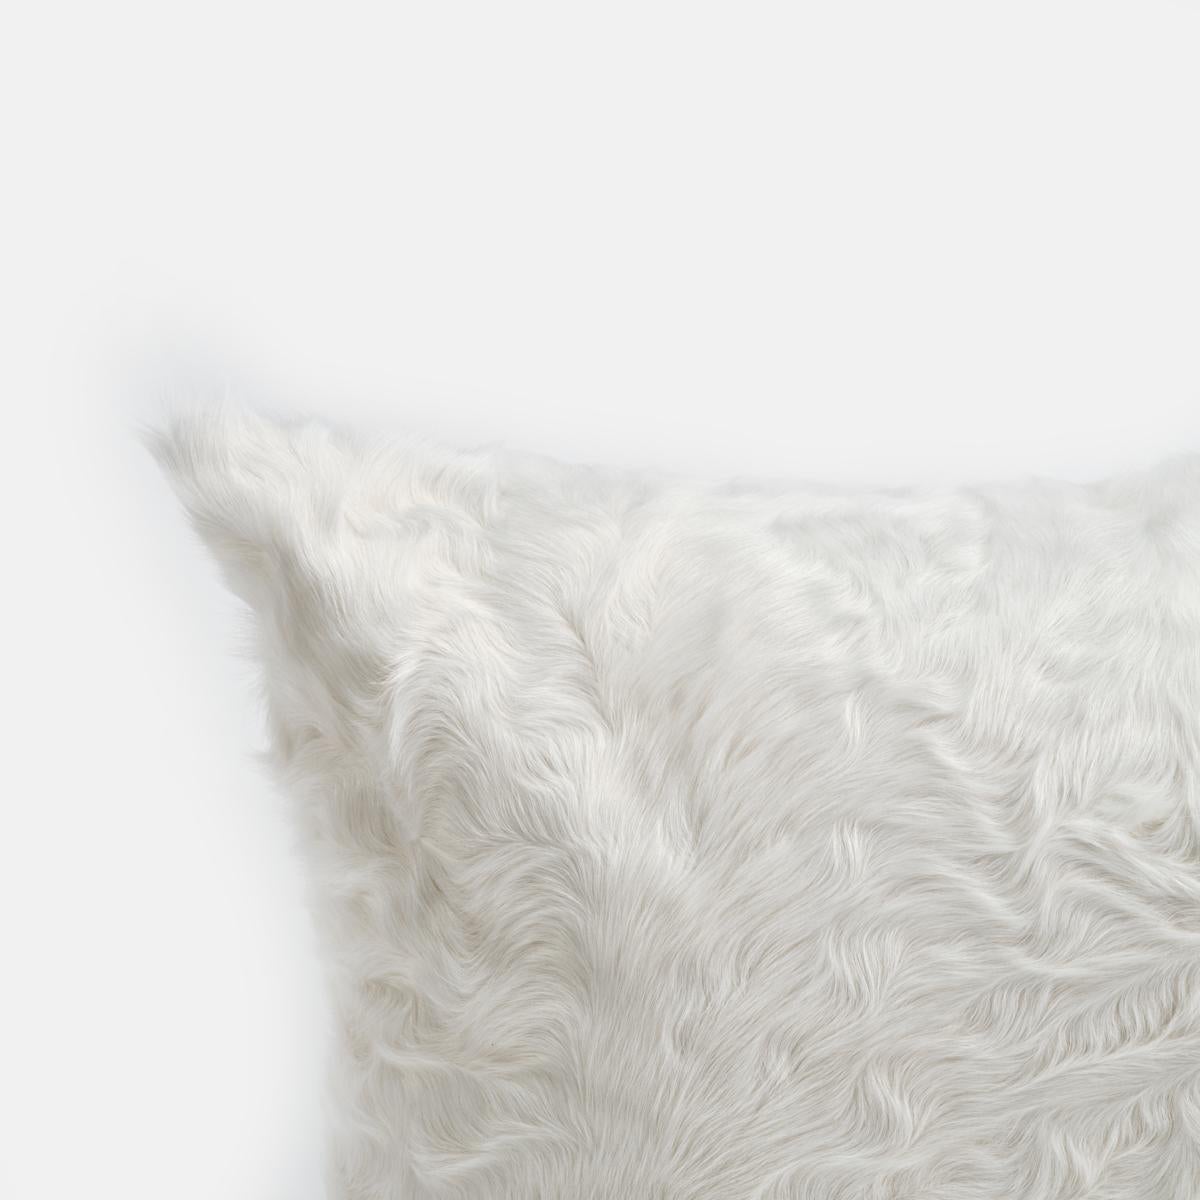 Waves White Xiangao Lamb Fur Pillow Cushion by Muchi Decor In New Condition For Sale In Poviglio, IT